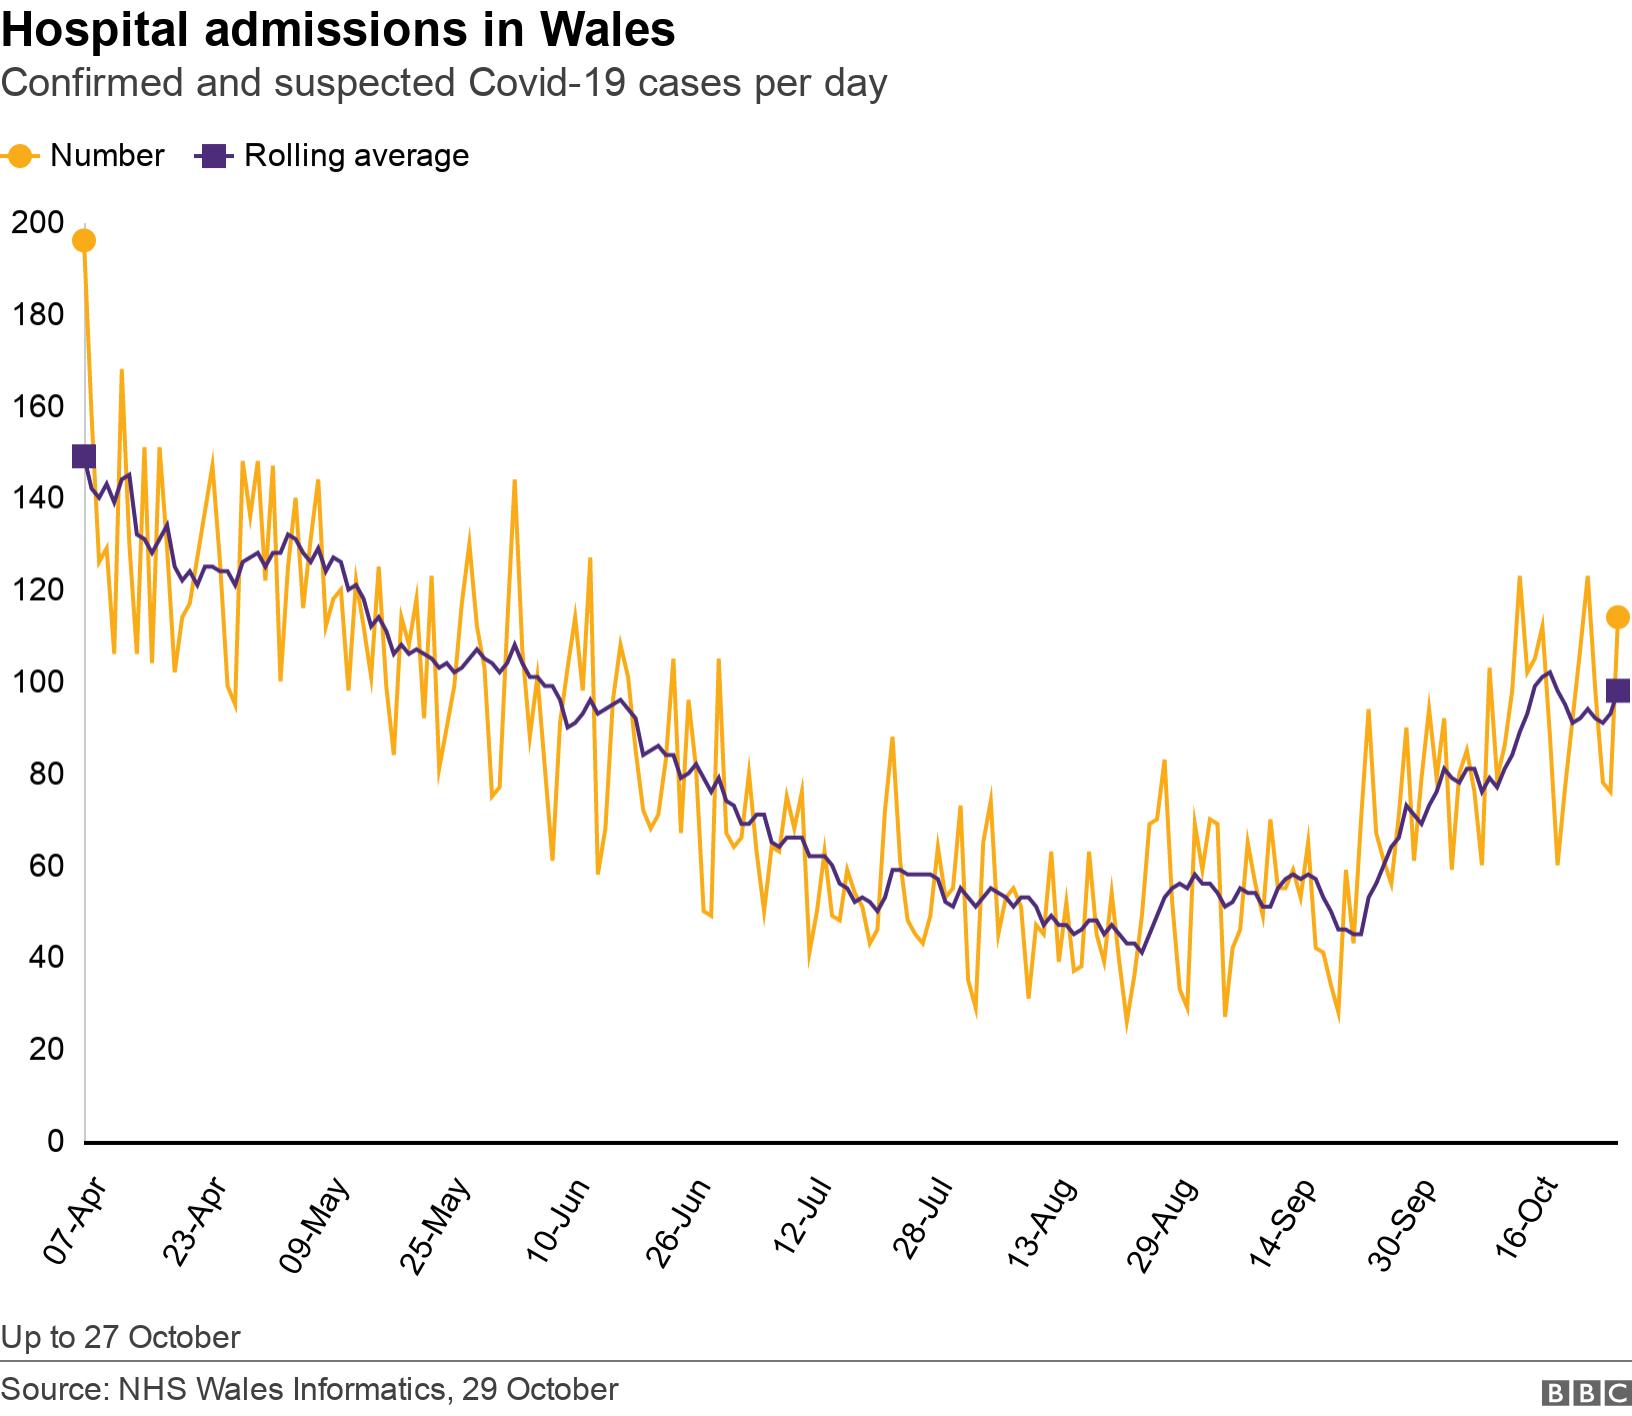 Hospital admissions in Wales. Confirmed and suspected Covid-19 cases per day. Up to 27 October.